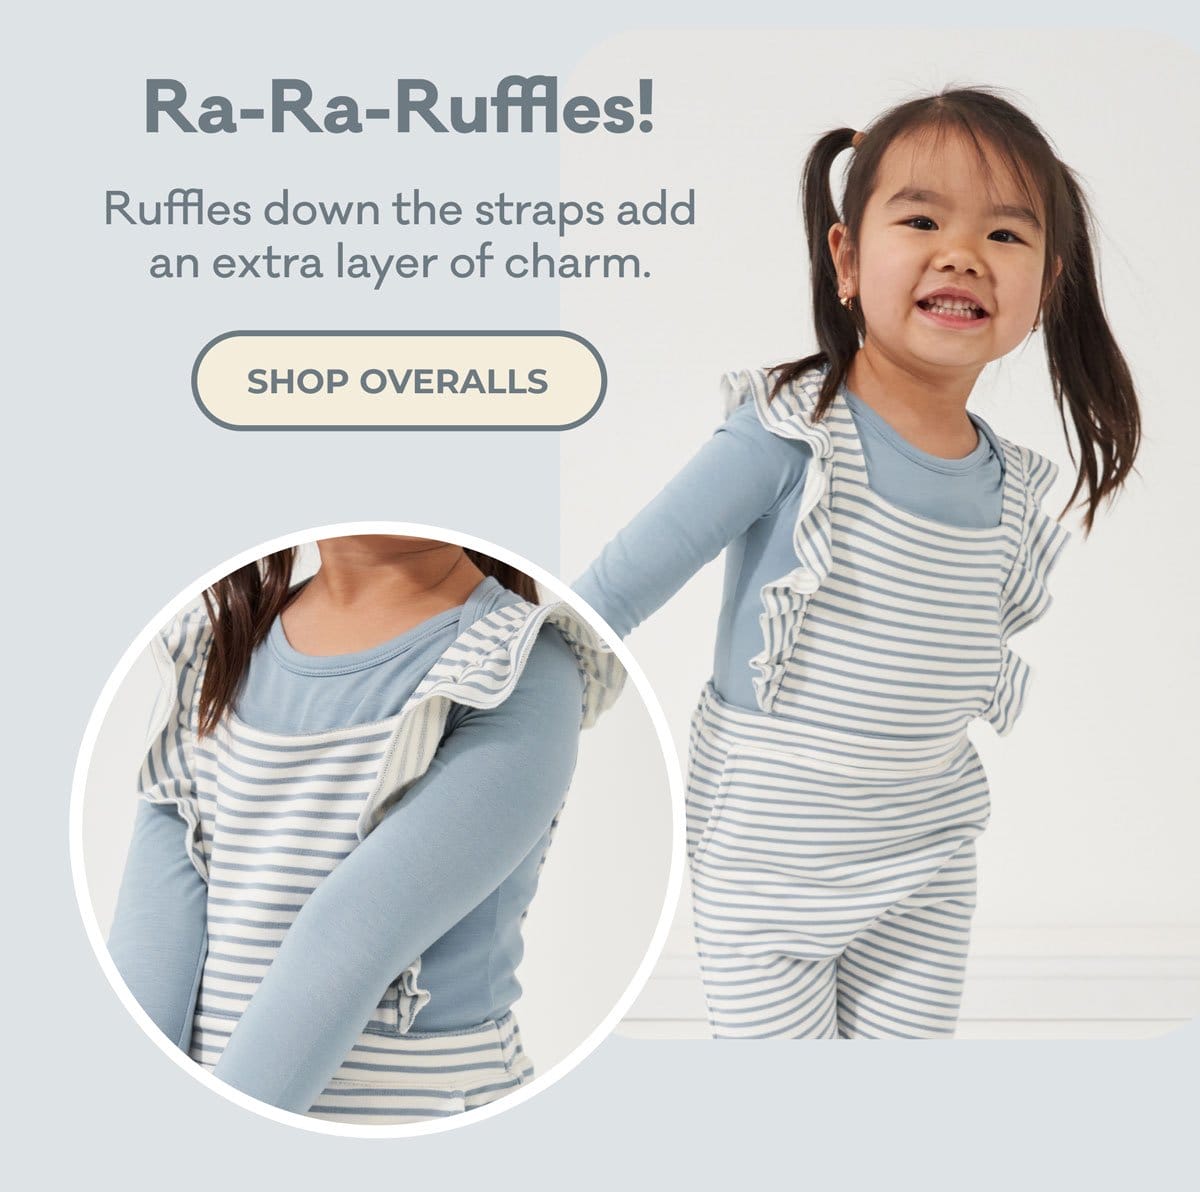 Ra-Ra-Ruffles! Ruffles down the straps add an extra layer of charm. | SHOP OVERALLS